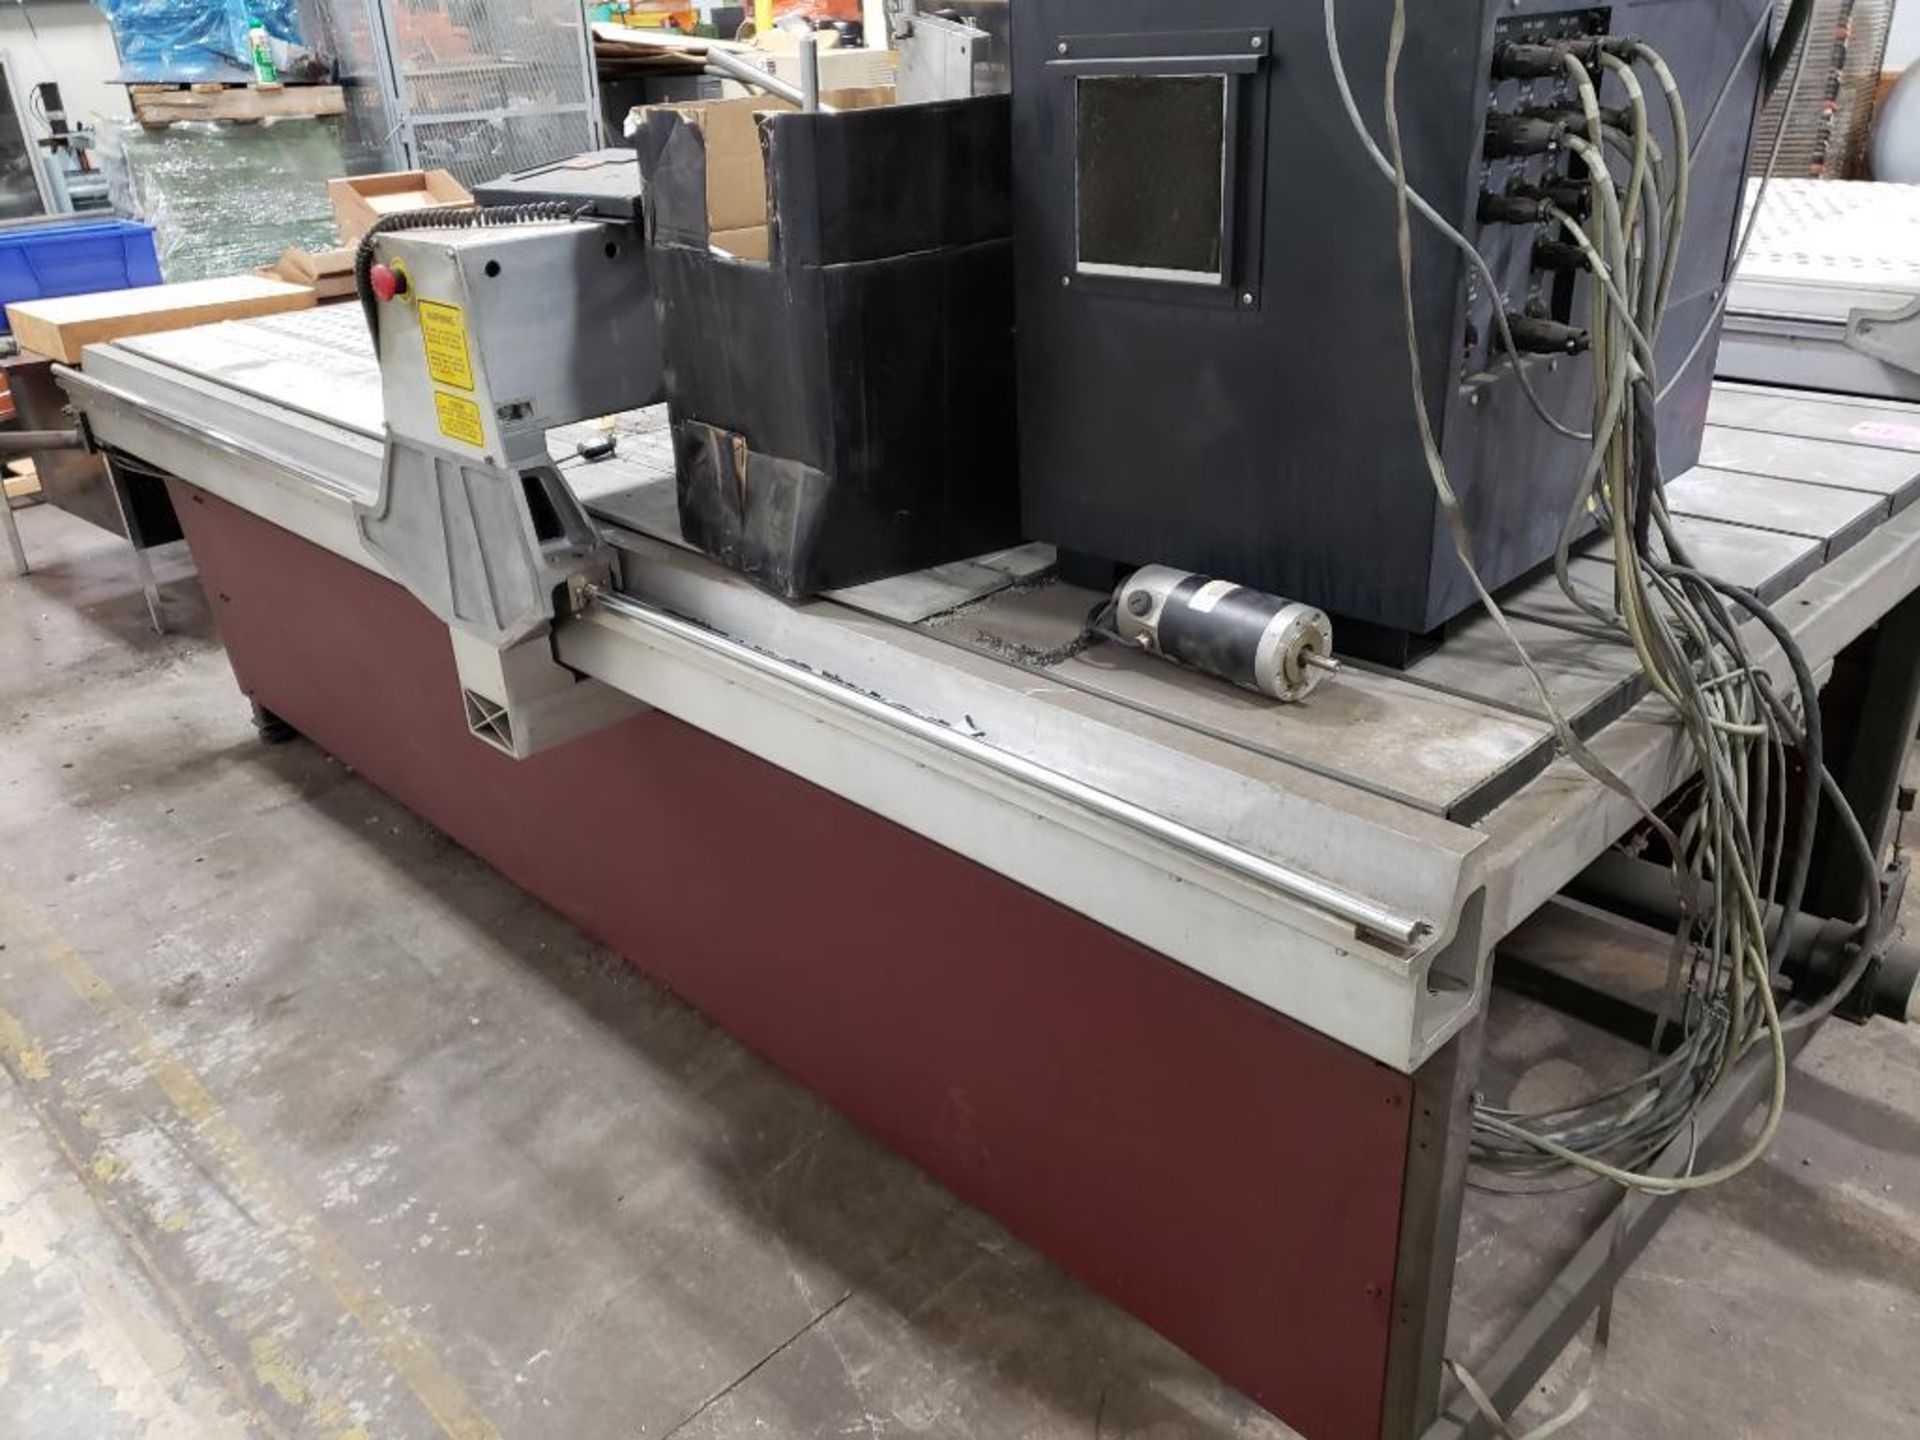 (Parts/Repairable) Gerber Sabre Model 408 CNC router. 54in x 121in table. 208-240v single phase. - Image 21 of 27